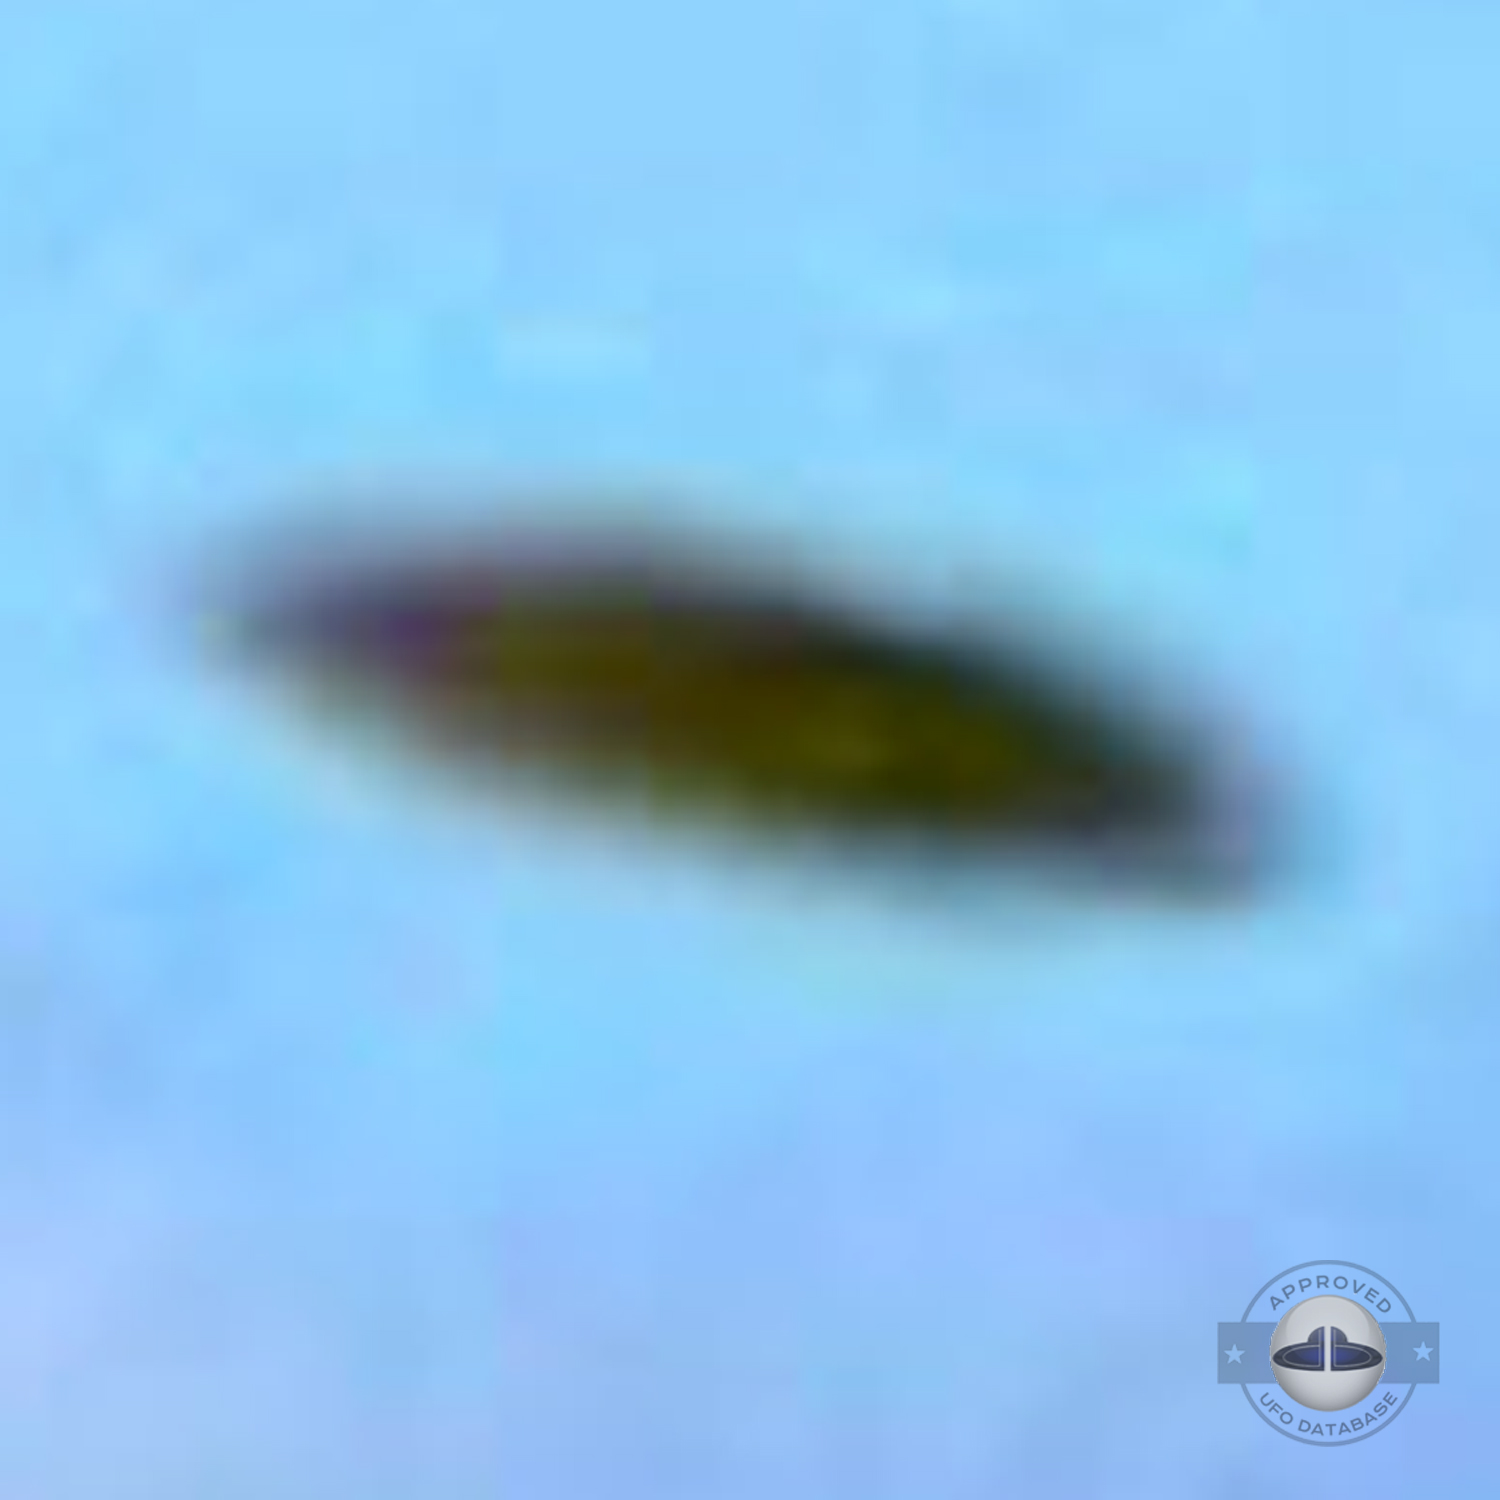 UFO picture taken on october 21, 2004 over the Kaneohe Bay in Hawaii UFO Picture #13-5